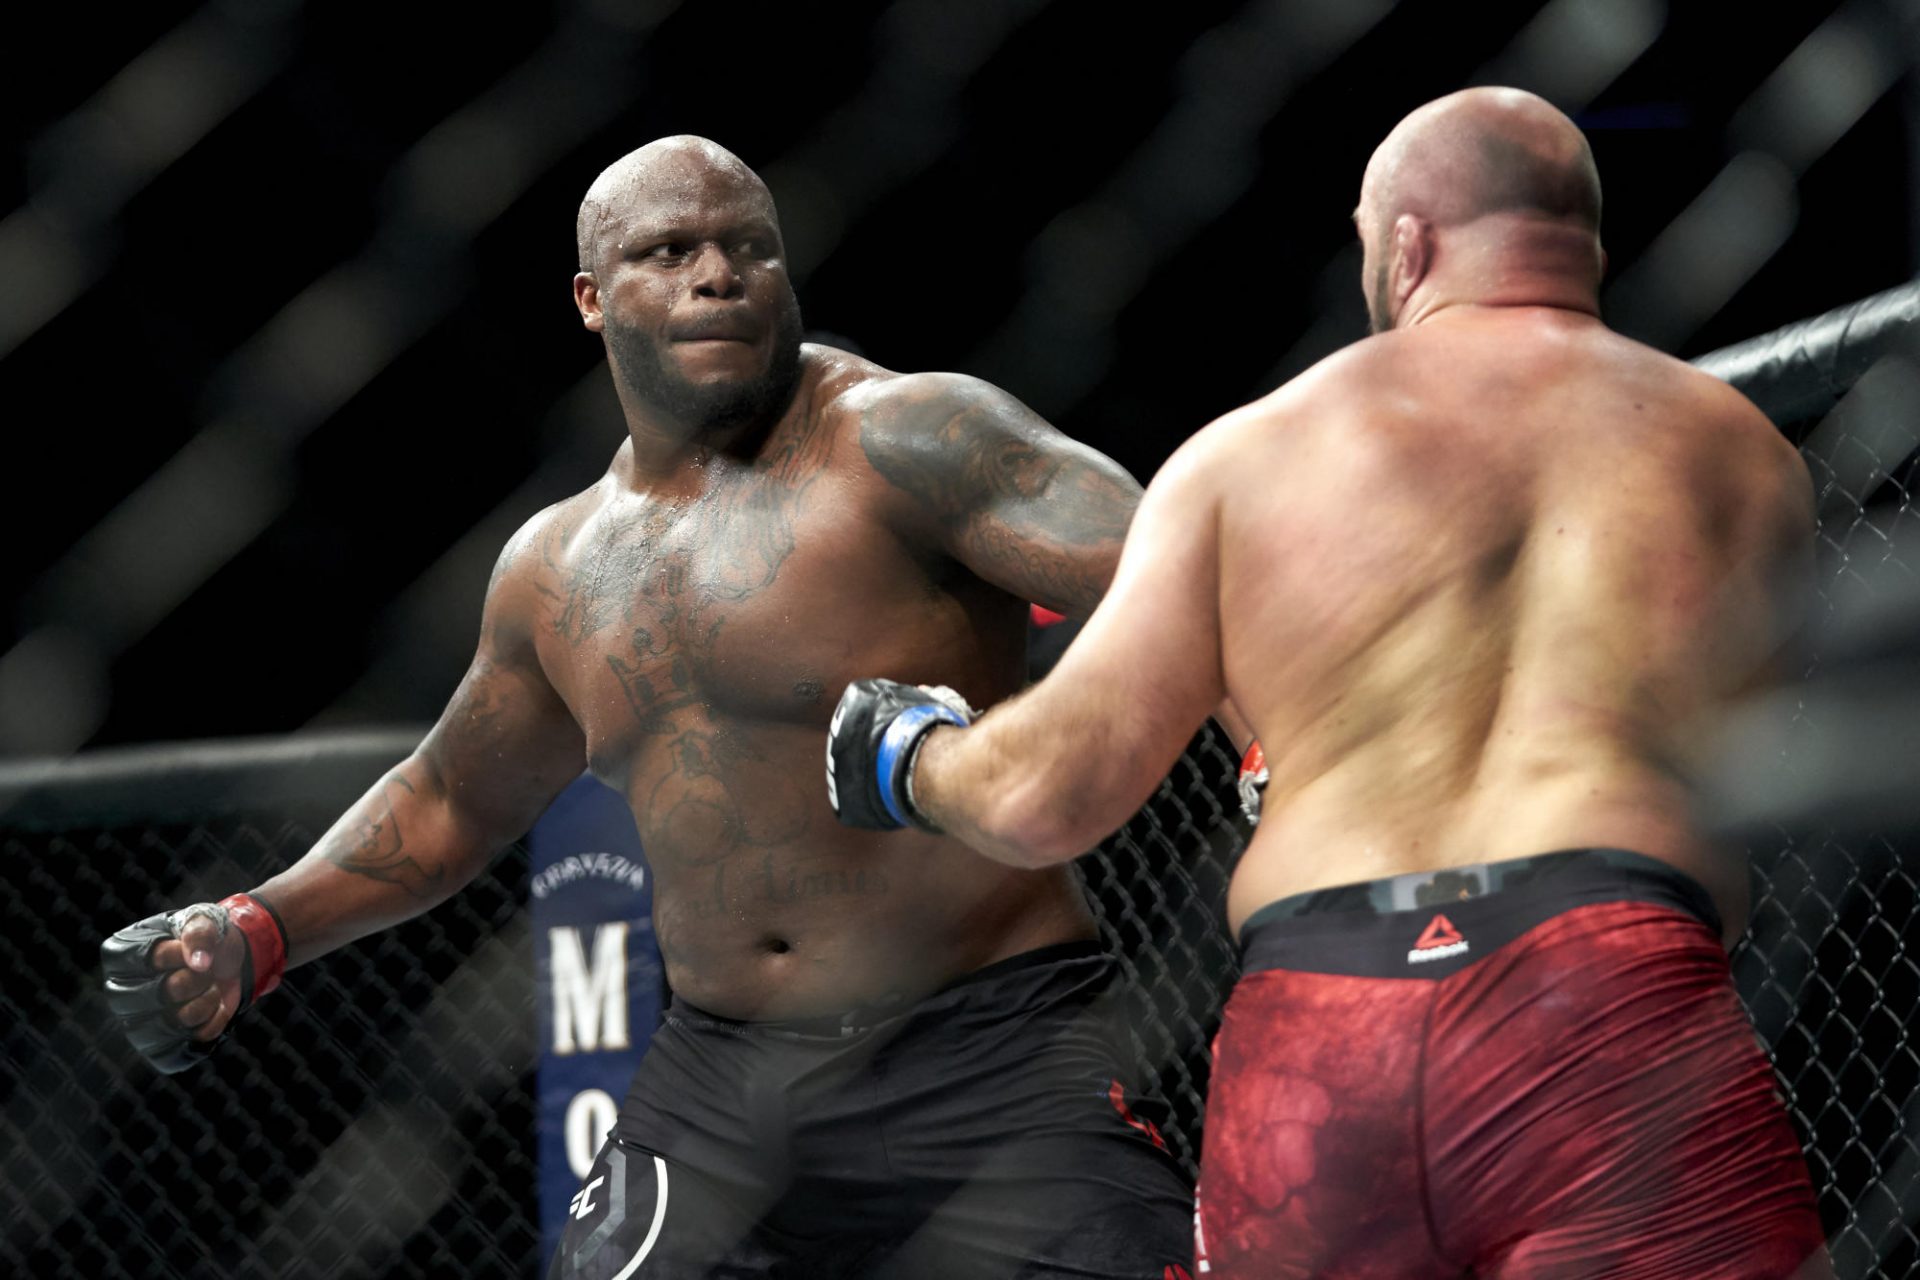 UFC heavyweight Derrick Lewis presentations aftermath of ill-informed try and allegedly wreck into his automotive